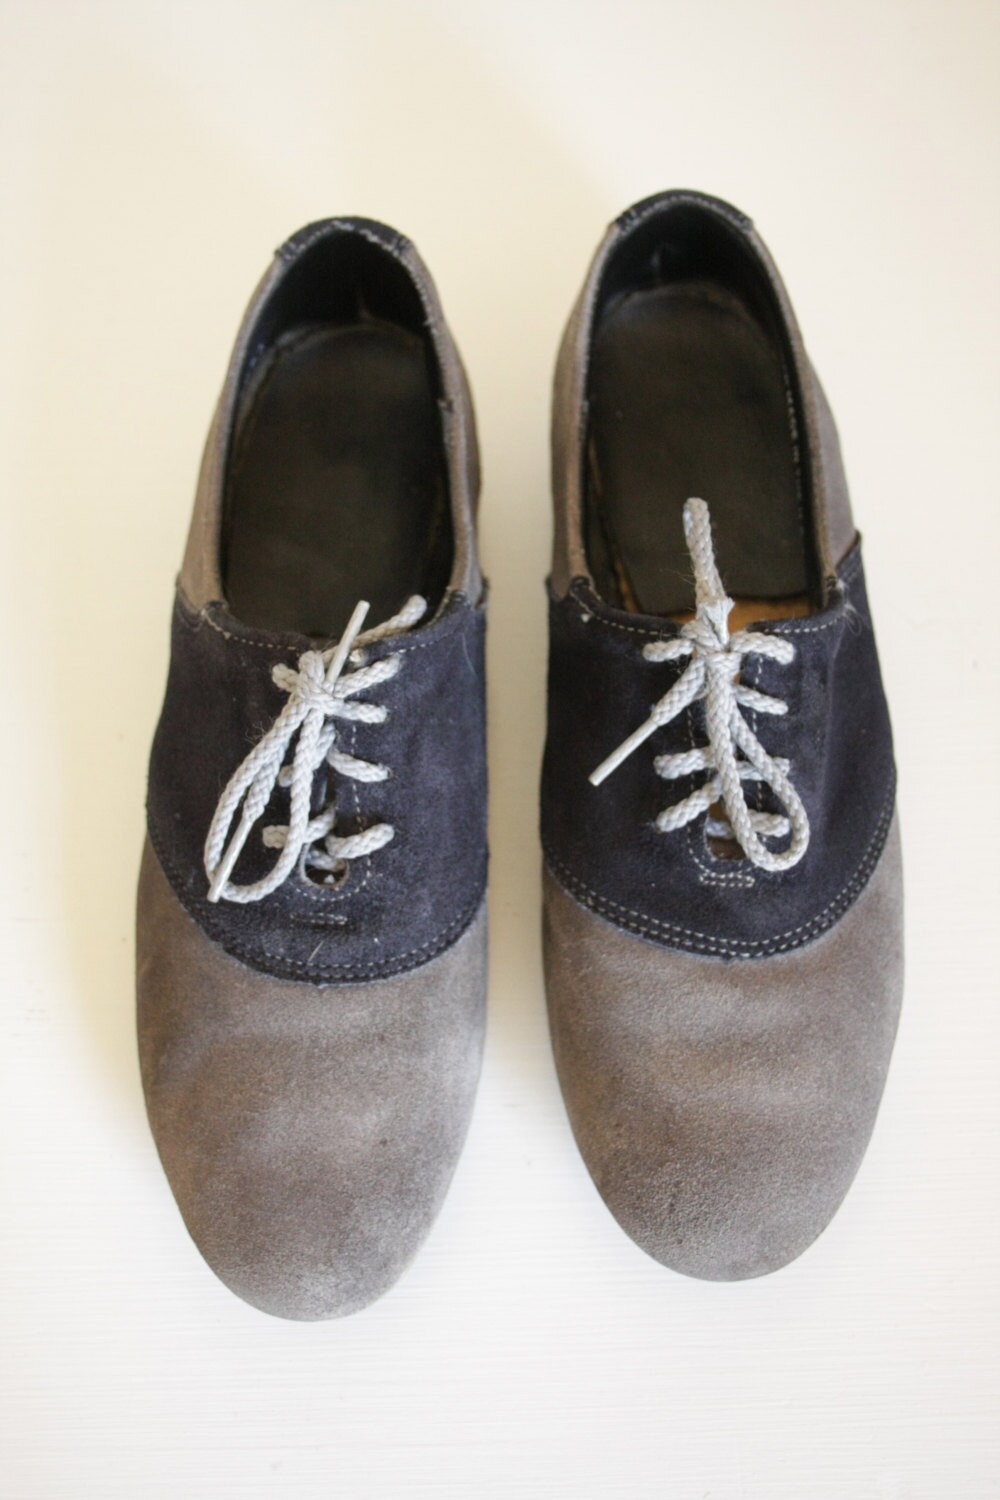 60s suede saddle shoes// gray and navy shoes